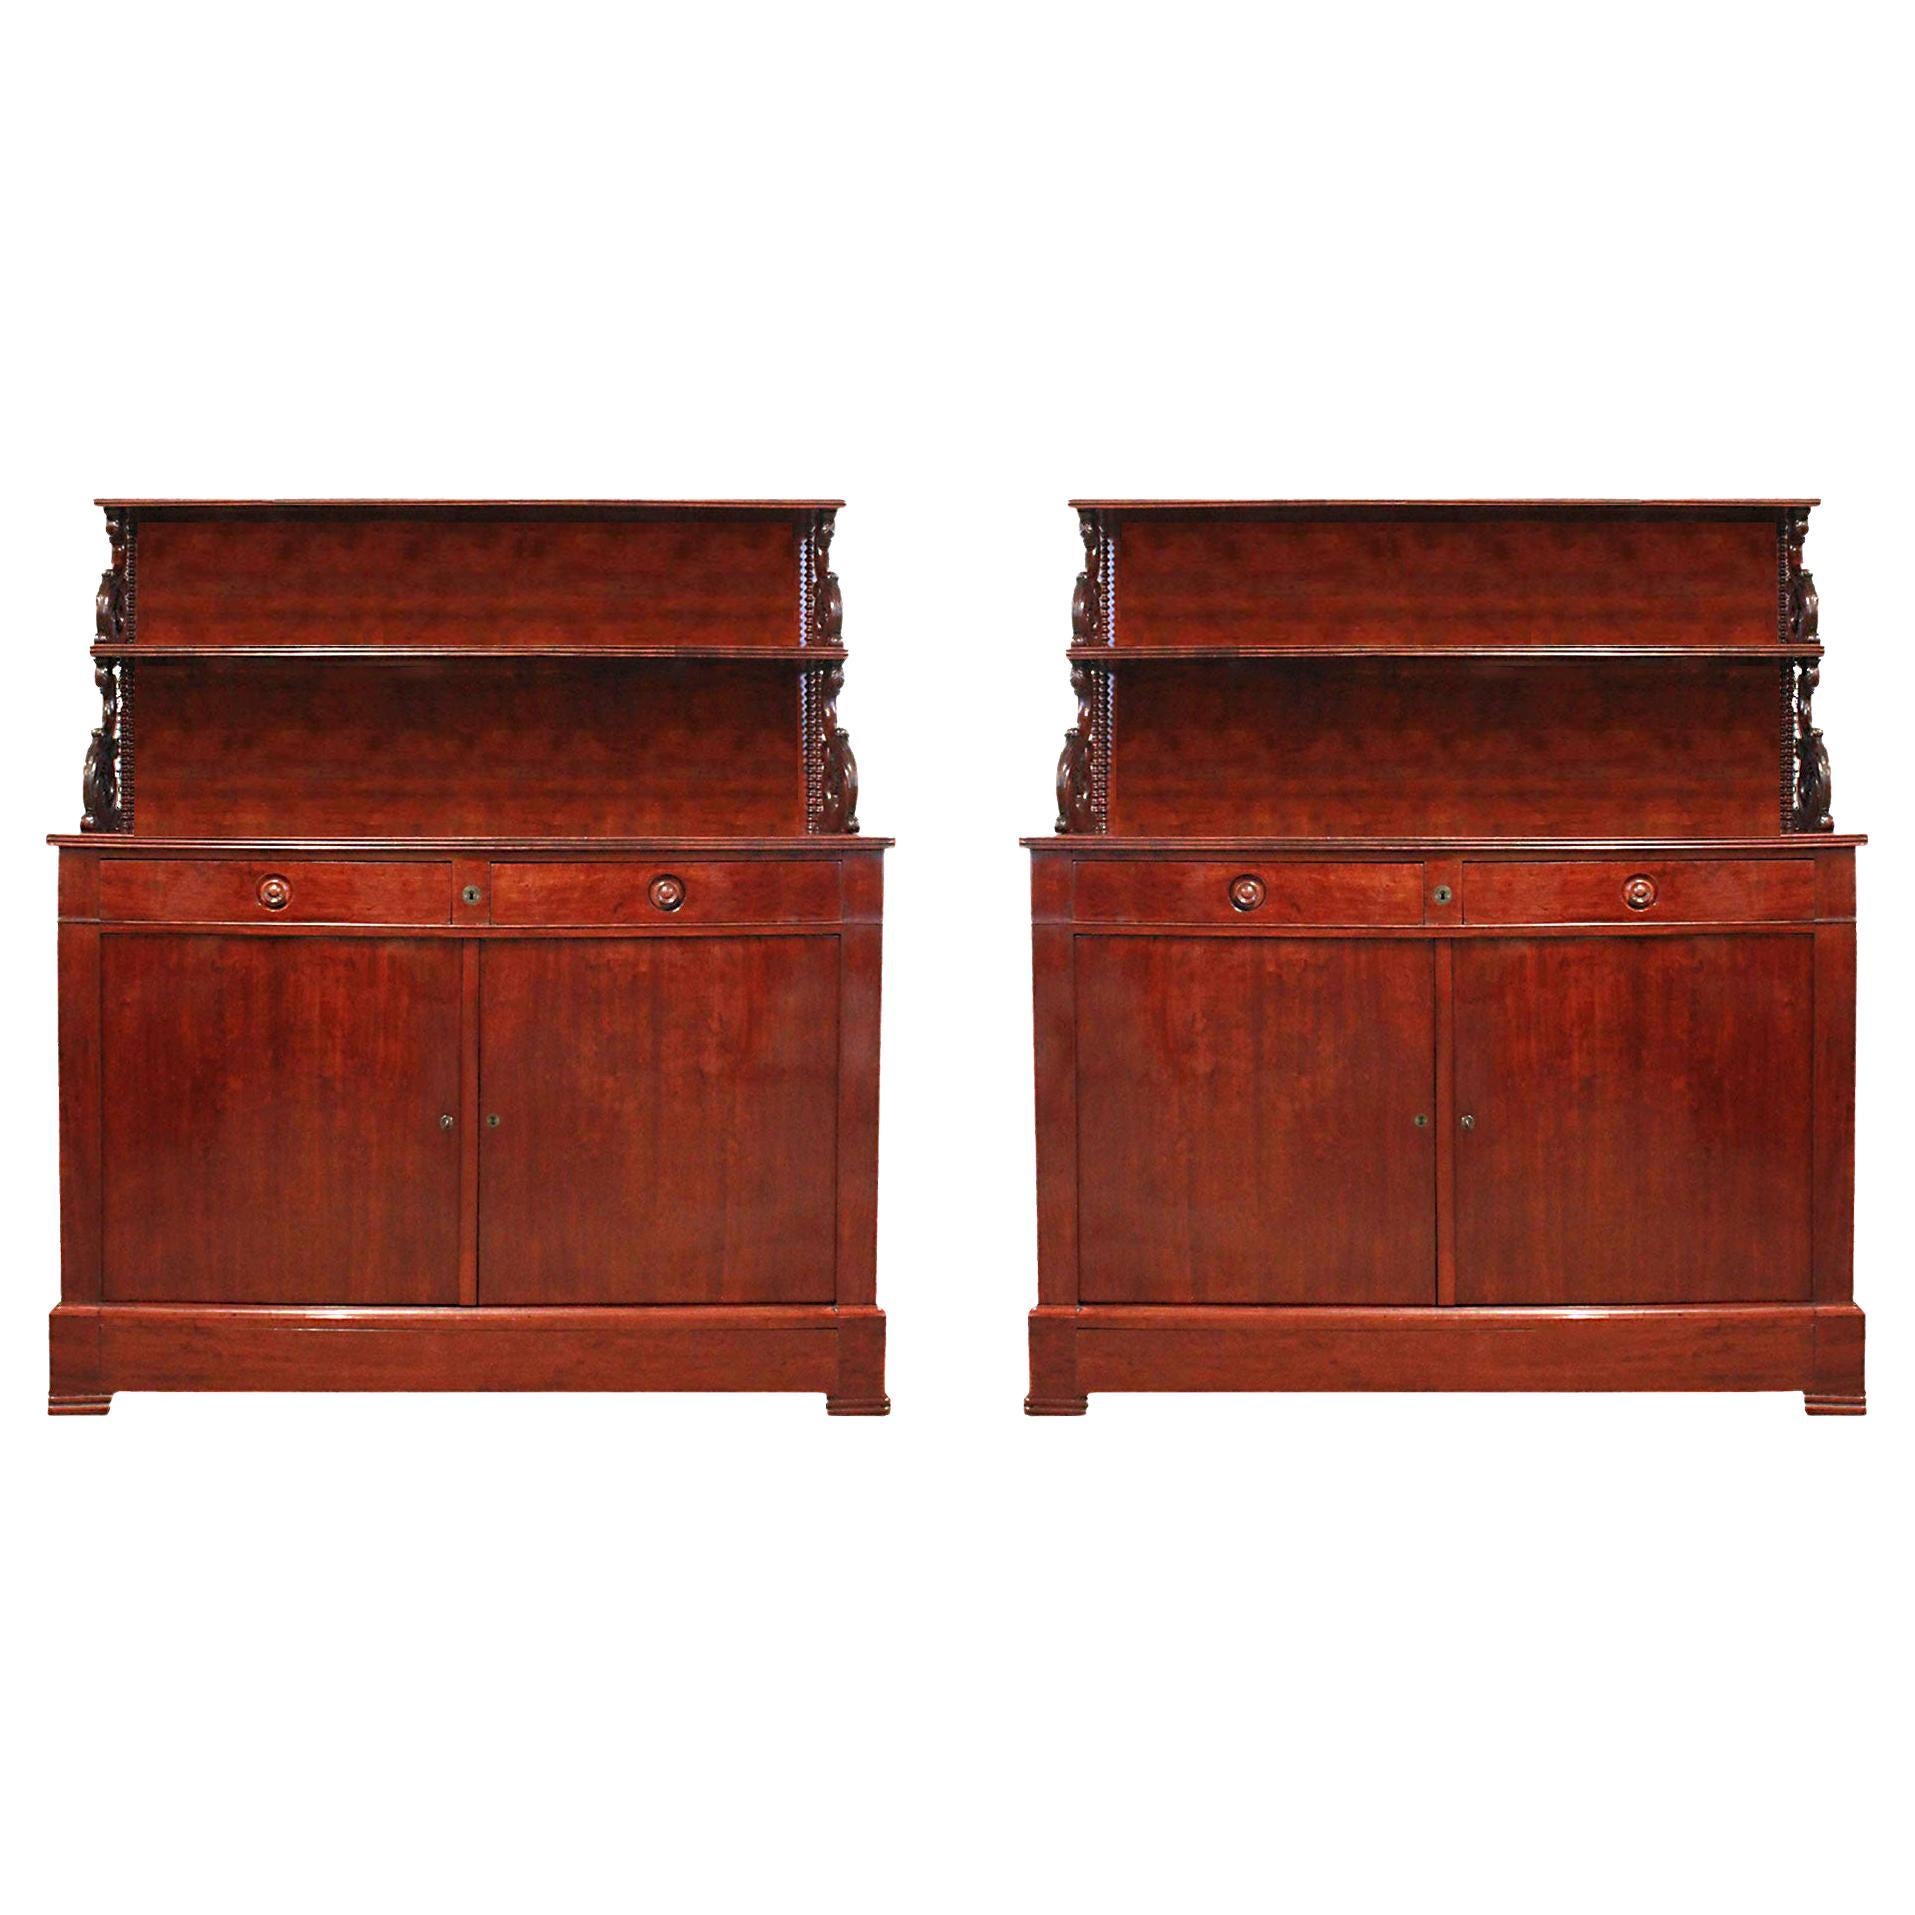 Pair of Early 19th Century Louis Philippe Period Mahogany Buffets, circa 1830